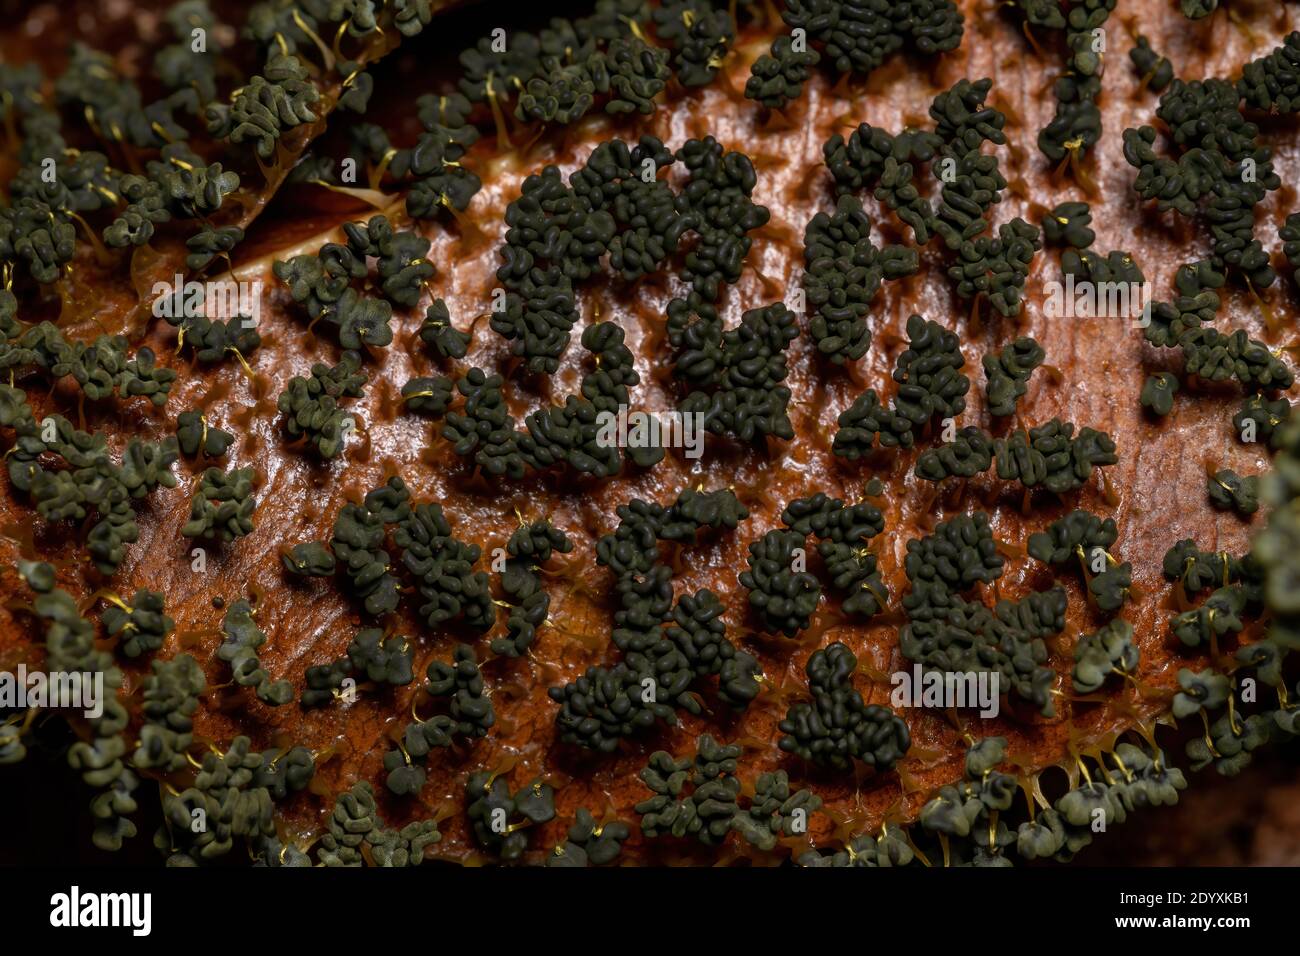 Sporangia of the Many Headed Slime of the species Physarum polycephalum scattered on dry leaves on the ground Stock Photo